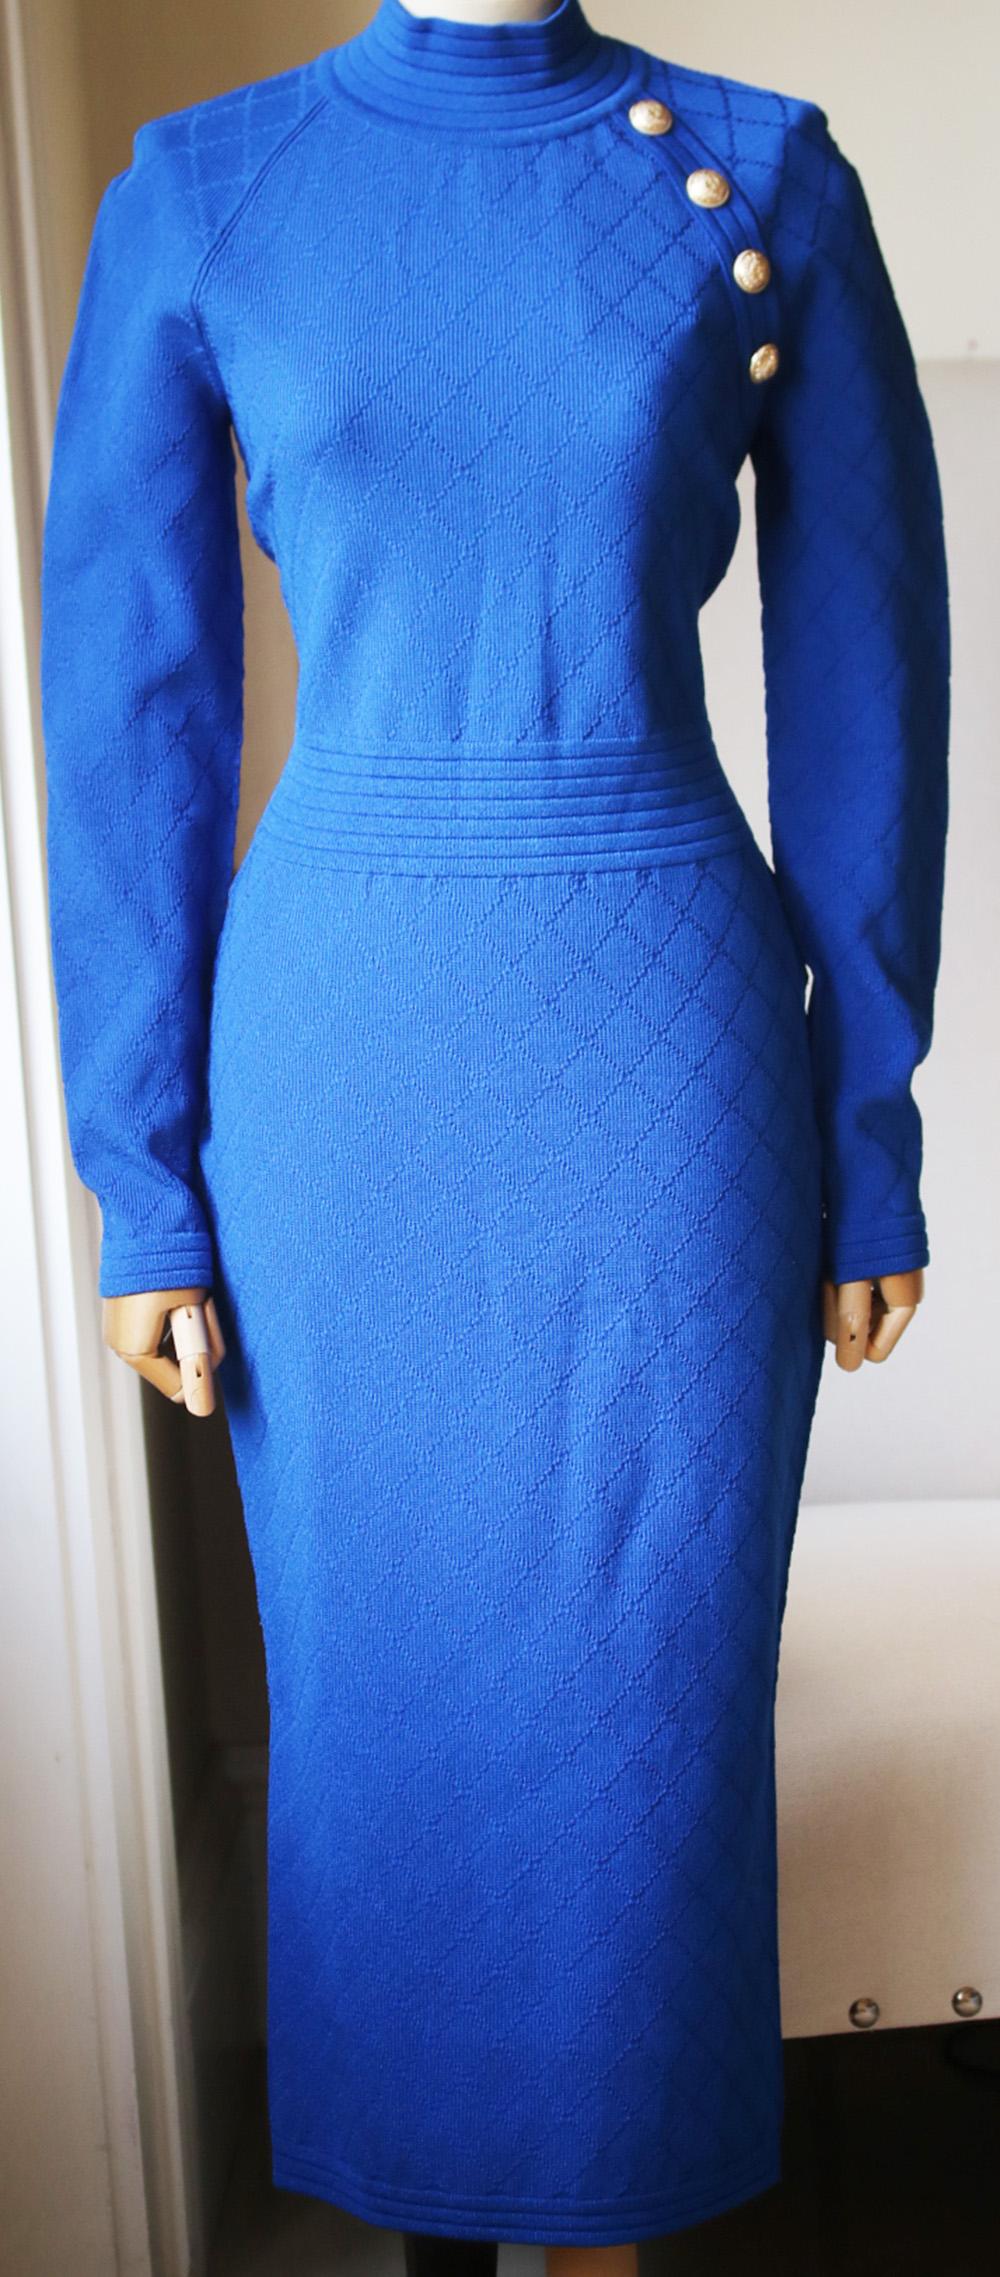 Balmain's turtleneck midi dress will make a bold statement at your next important meeting or dinner date thanks to the mood-boosting cobalt hue. This slim-fitting style is made from the sculpting jacquard-knit and has a ribbed band at the waist to